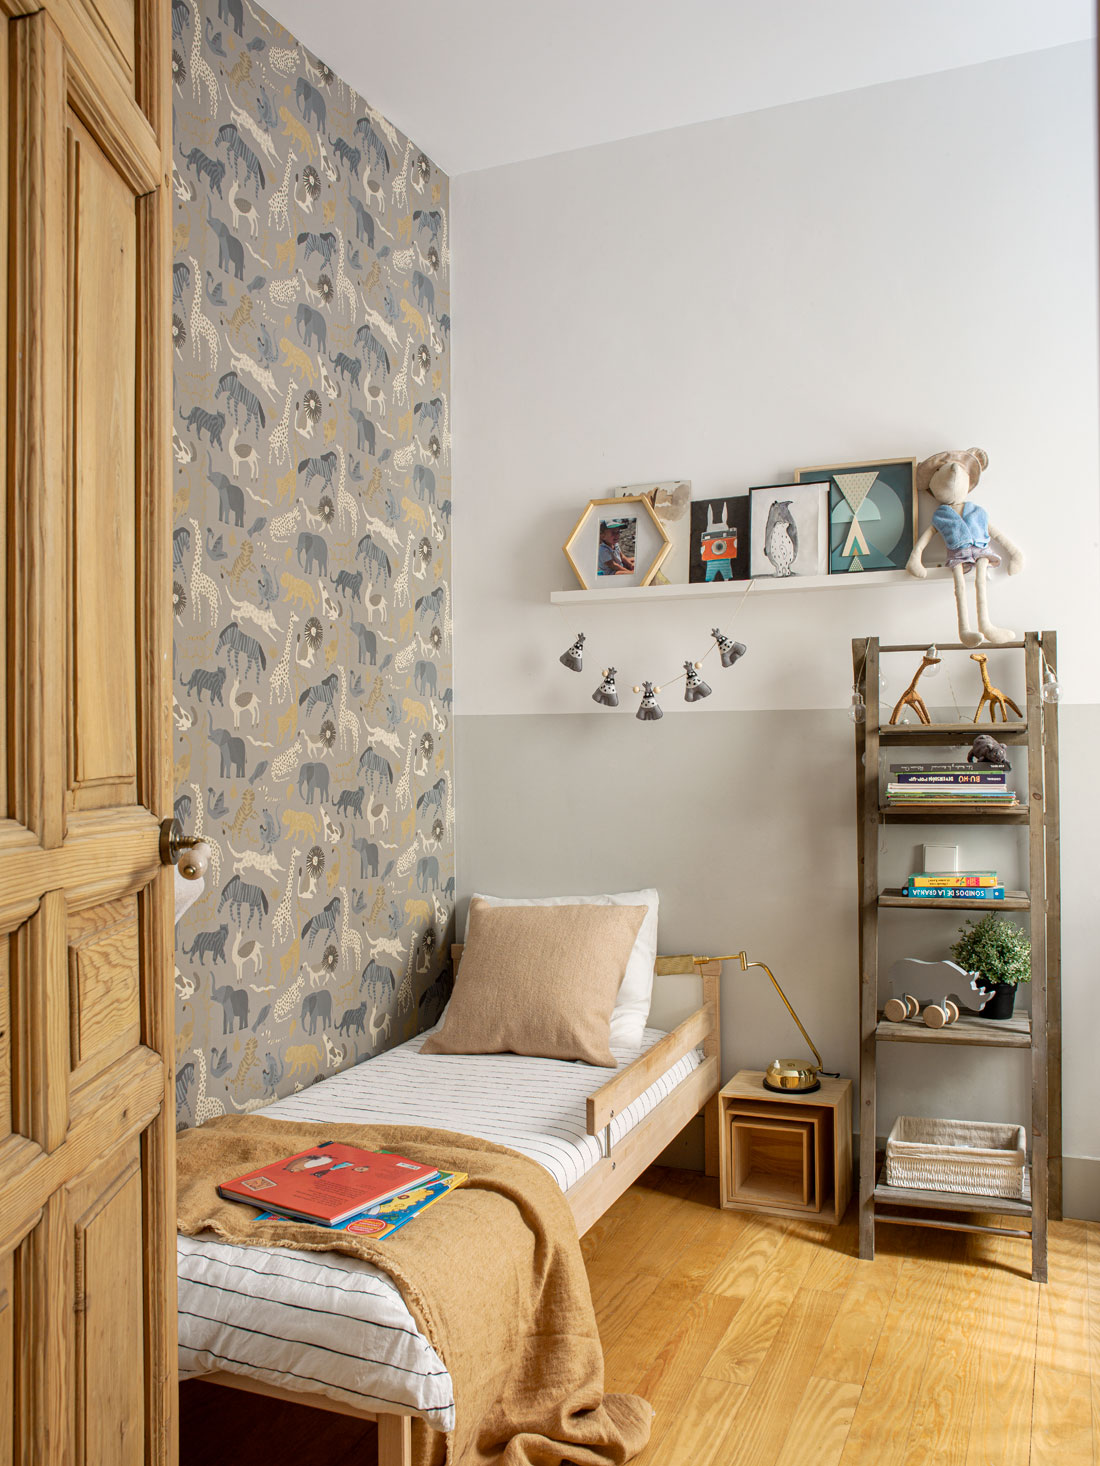 Kids Room Wallpaper | DPAGES